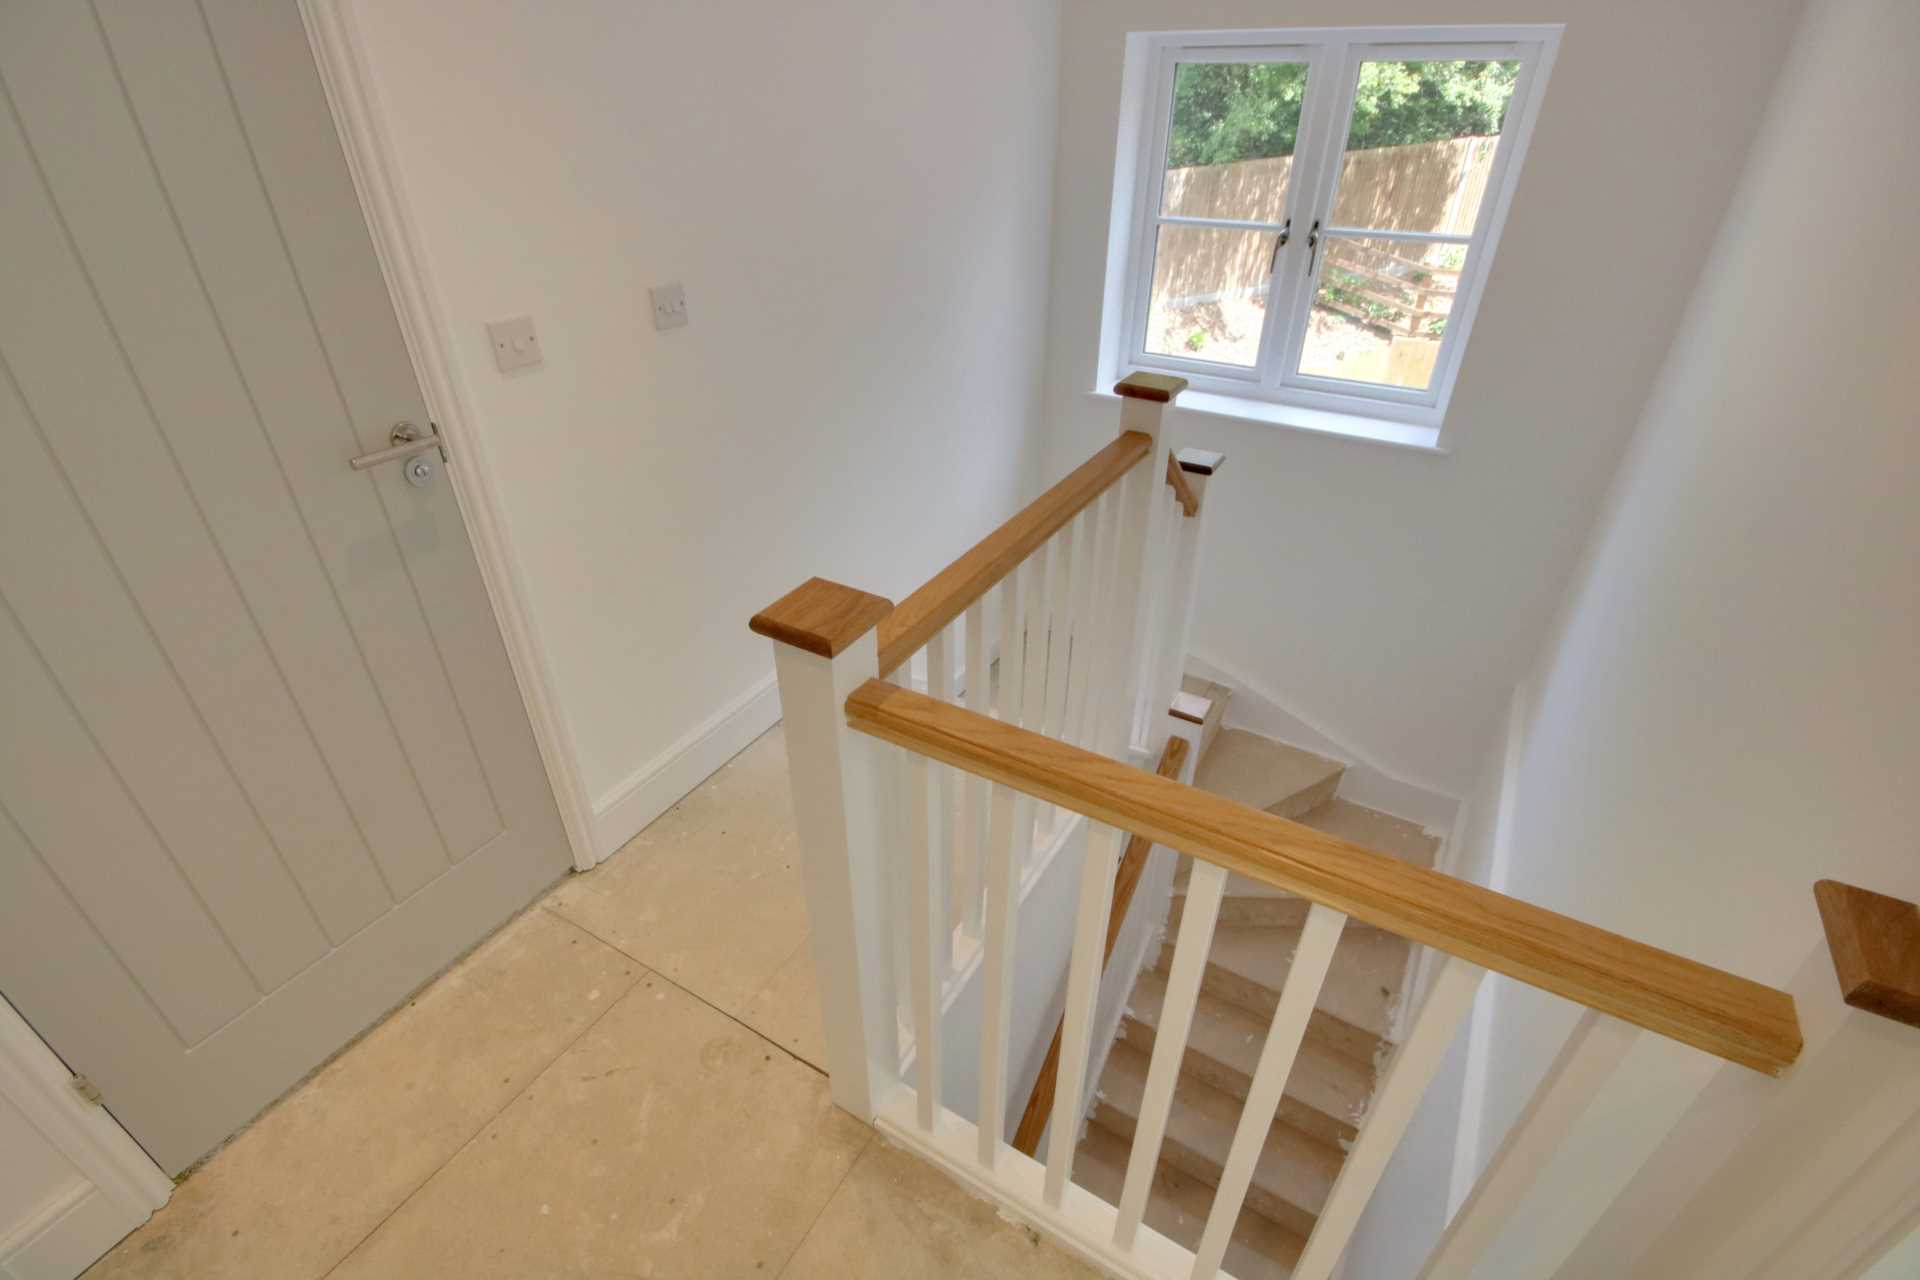 BRAND NEW 3 DOUBLE BED DETACHED with ENSUITE to MASTER BEDROOM, Image 21